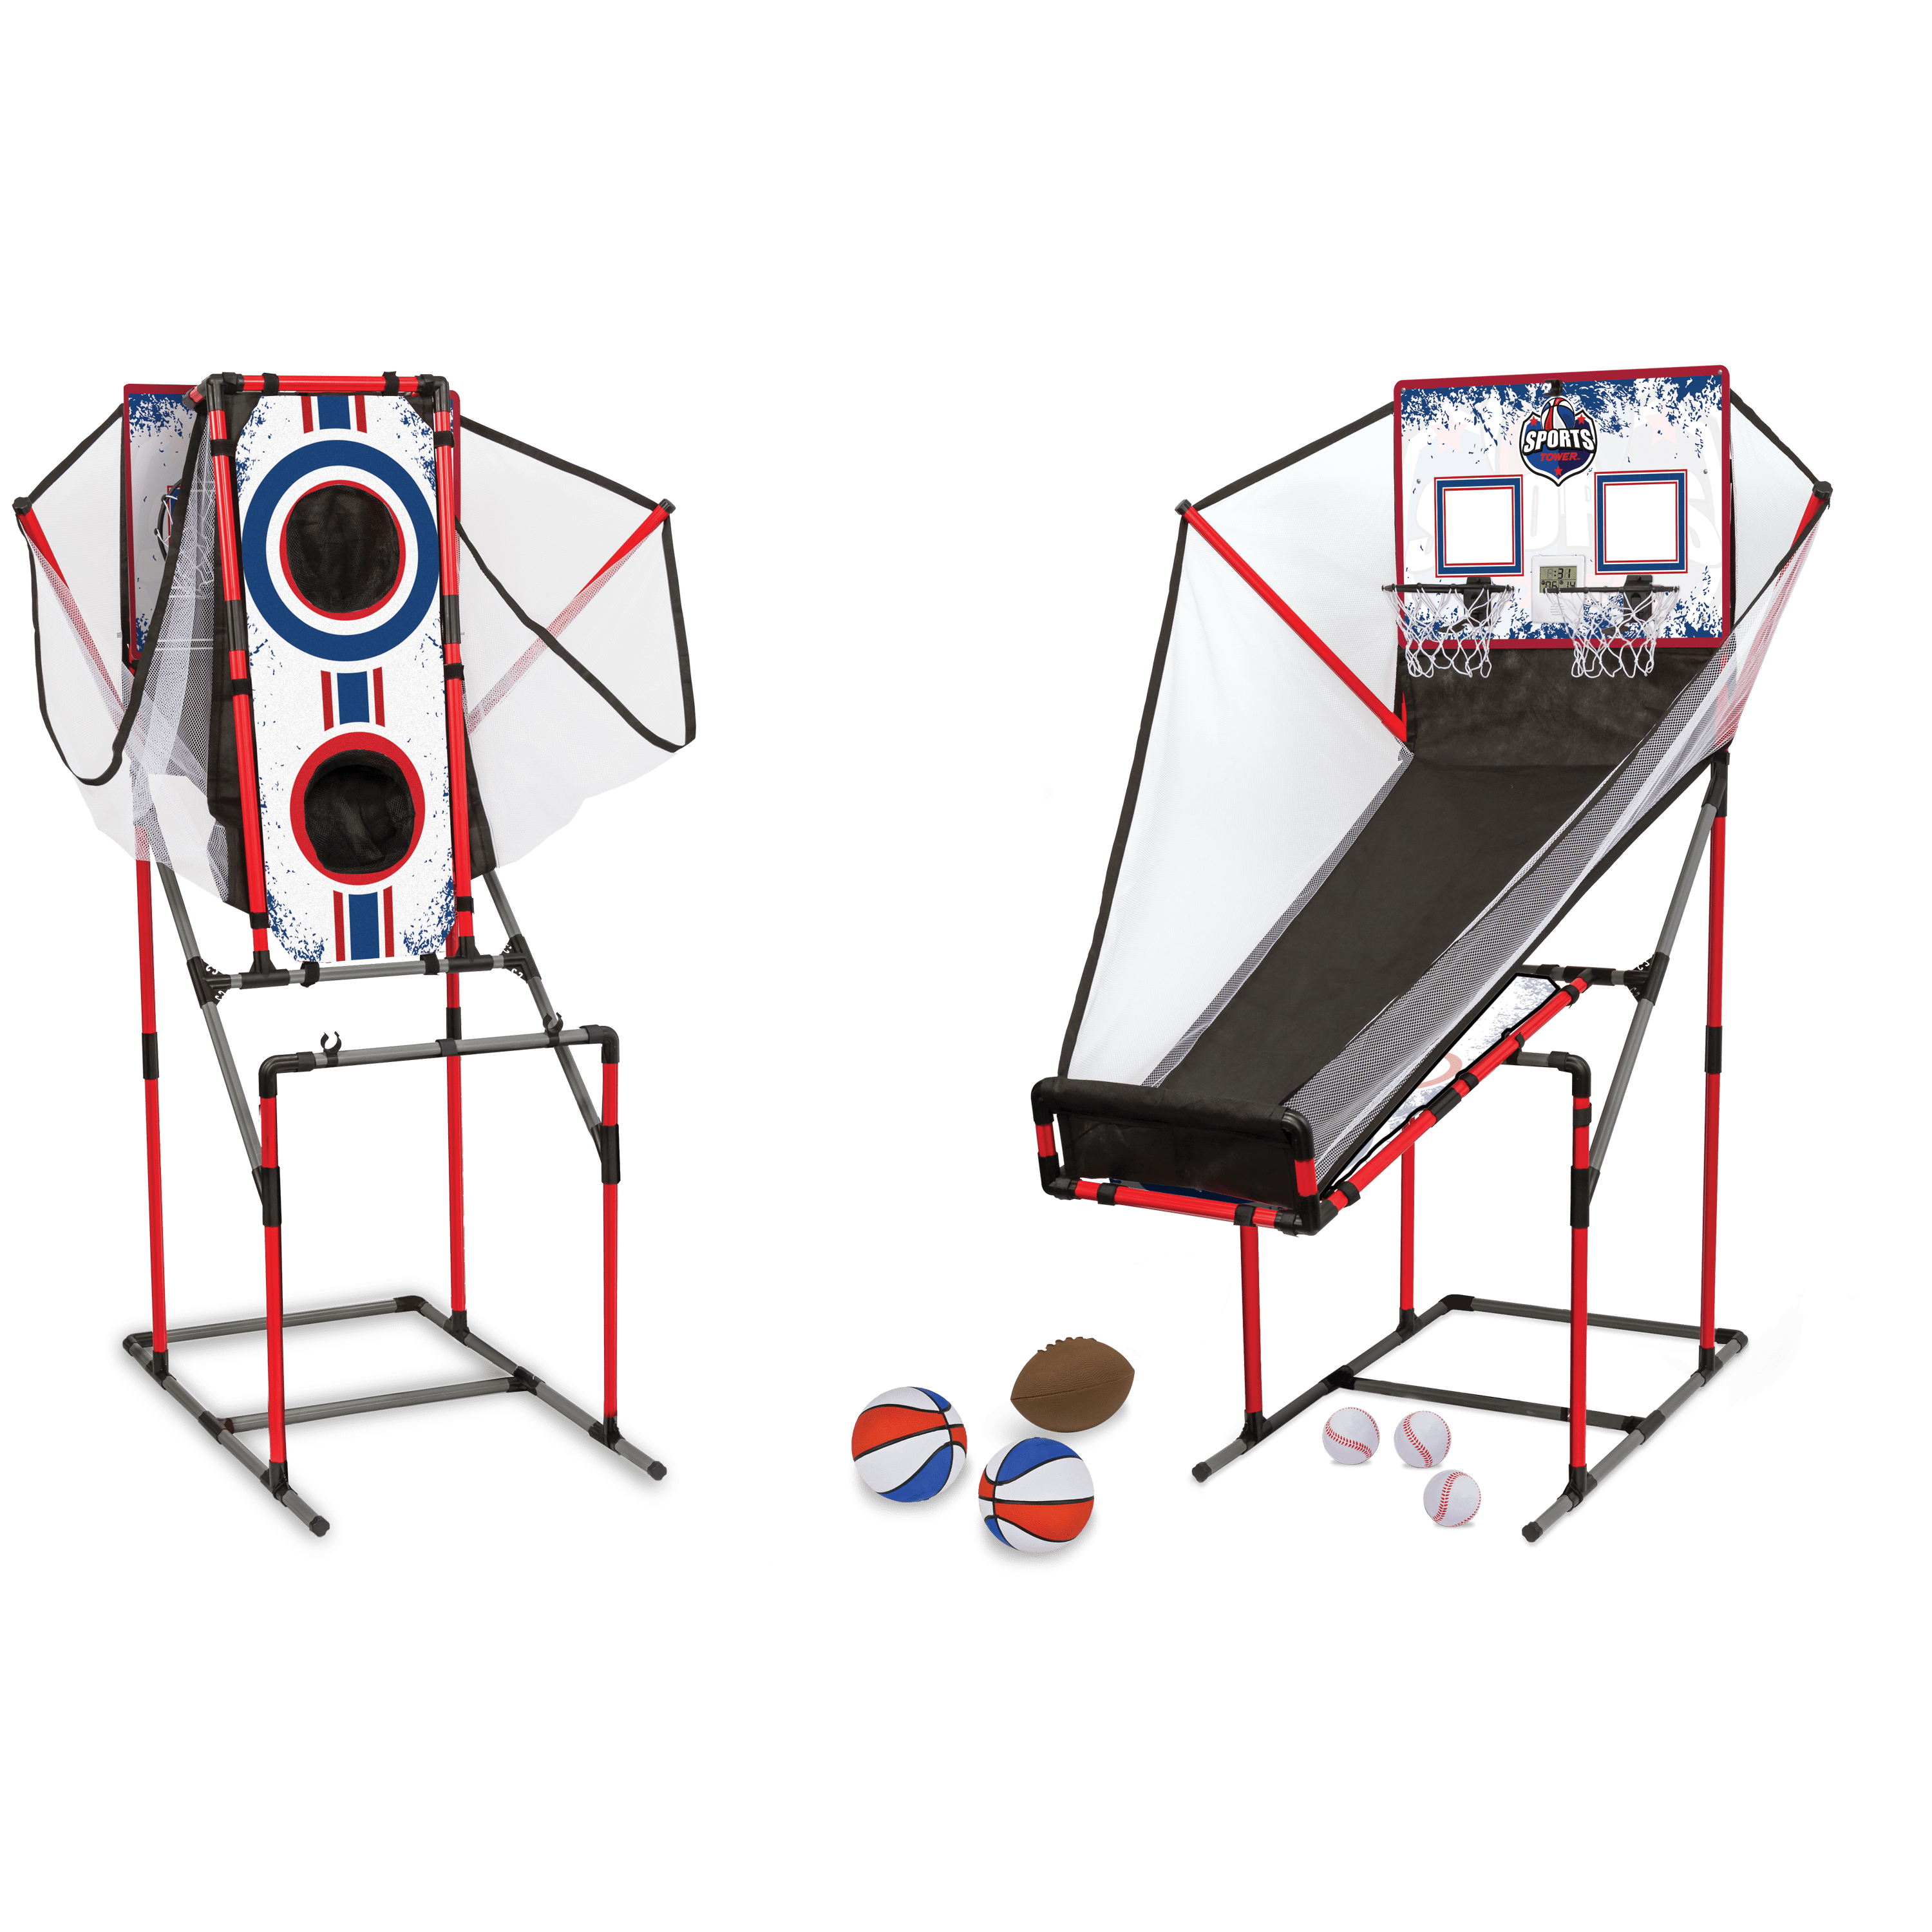 EastPoint Sports 3-in-1 Sports Center Arcade Game, Basketball, Baseball and Football